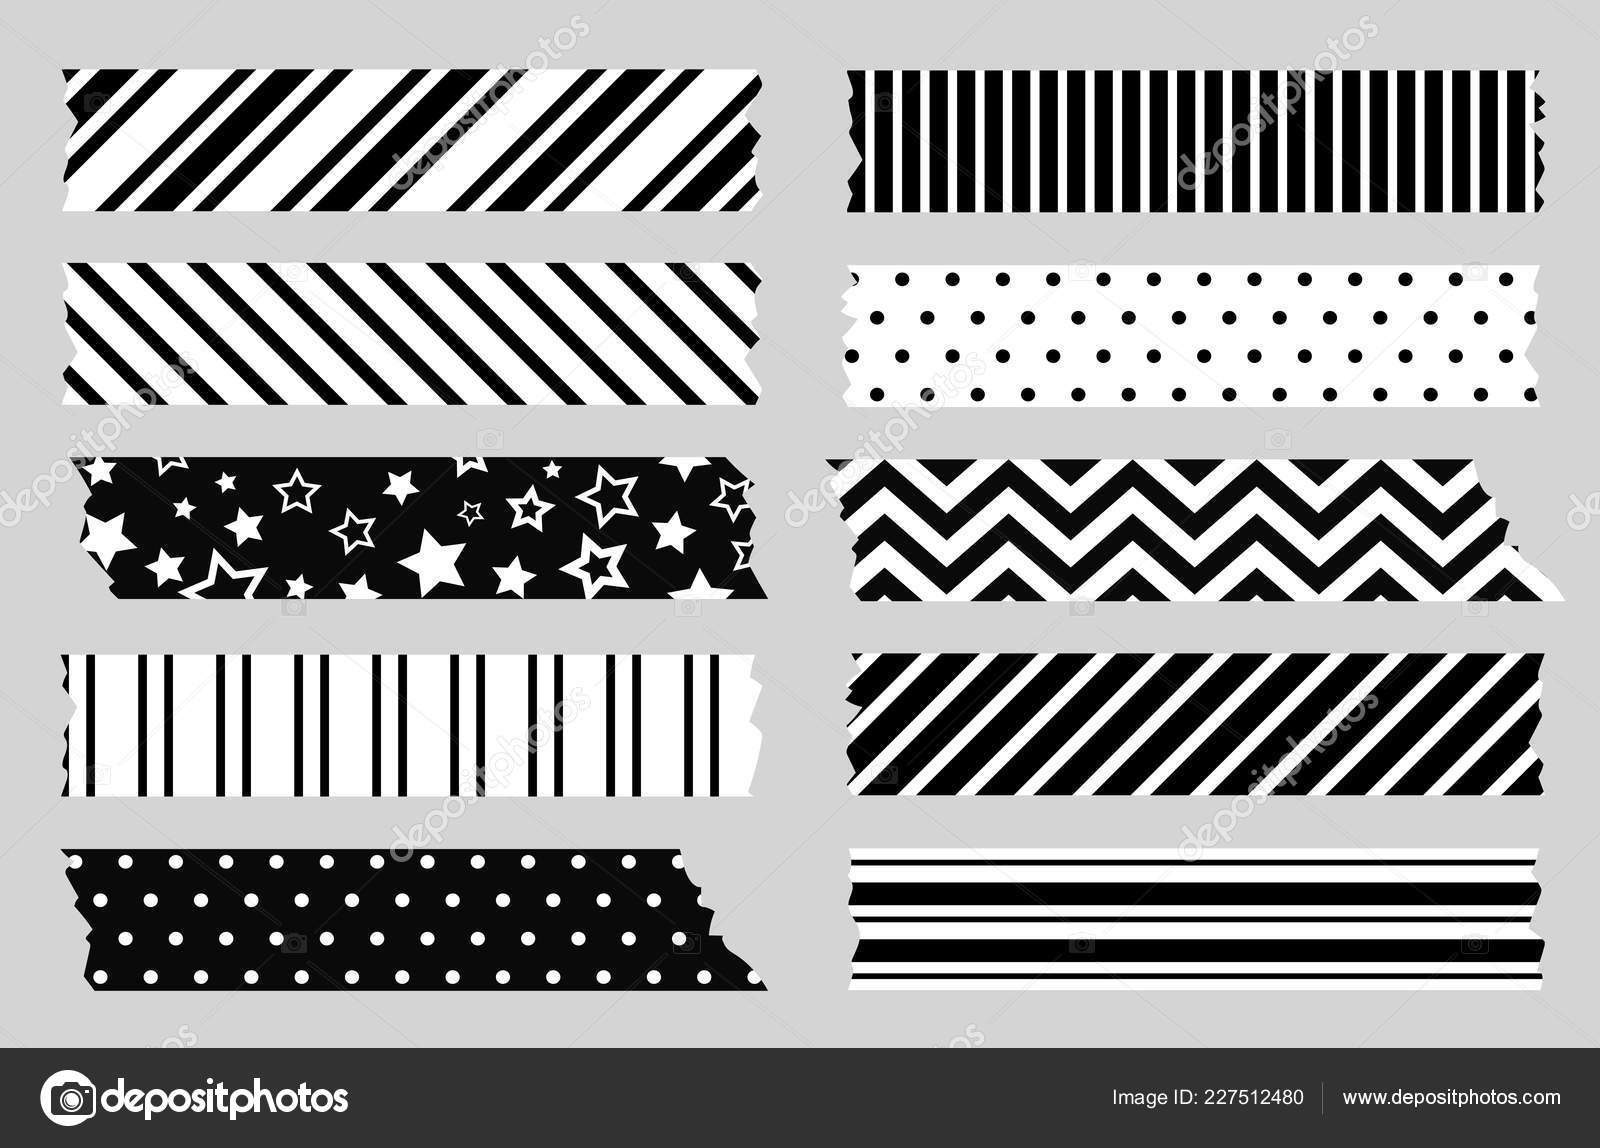 Adhesive tape with black and white geometric patterns. Scotch